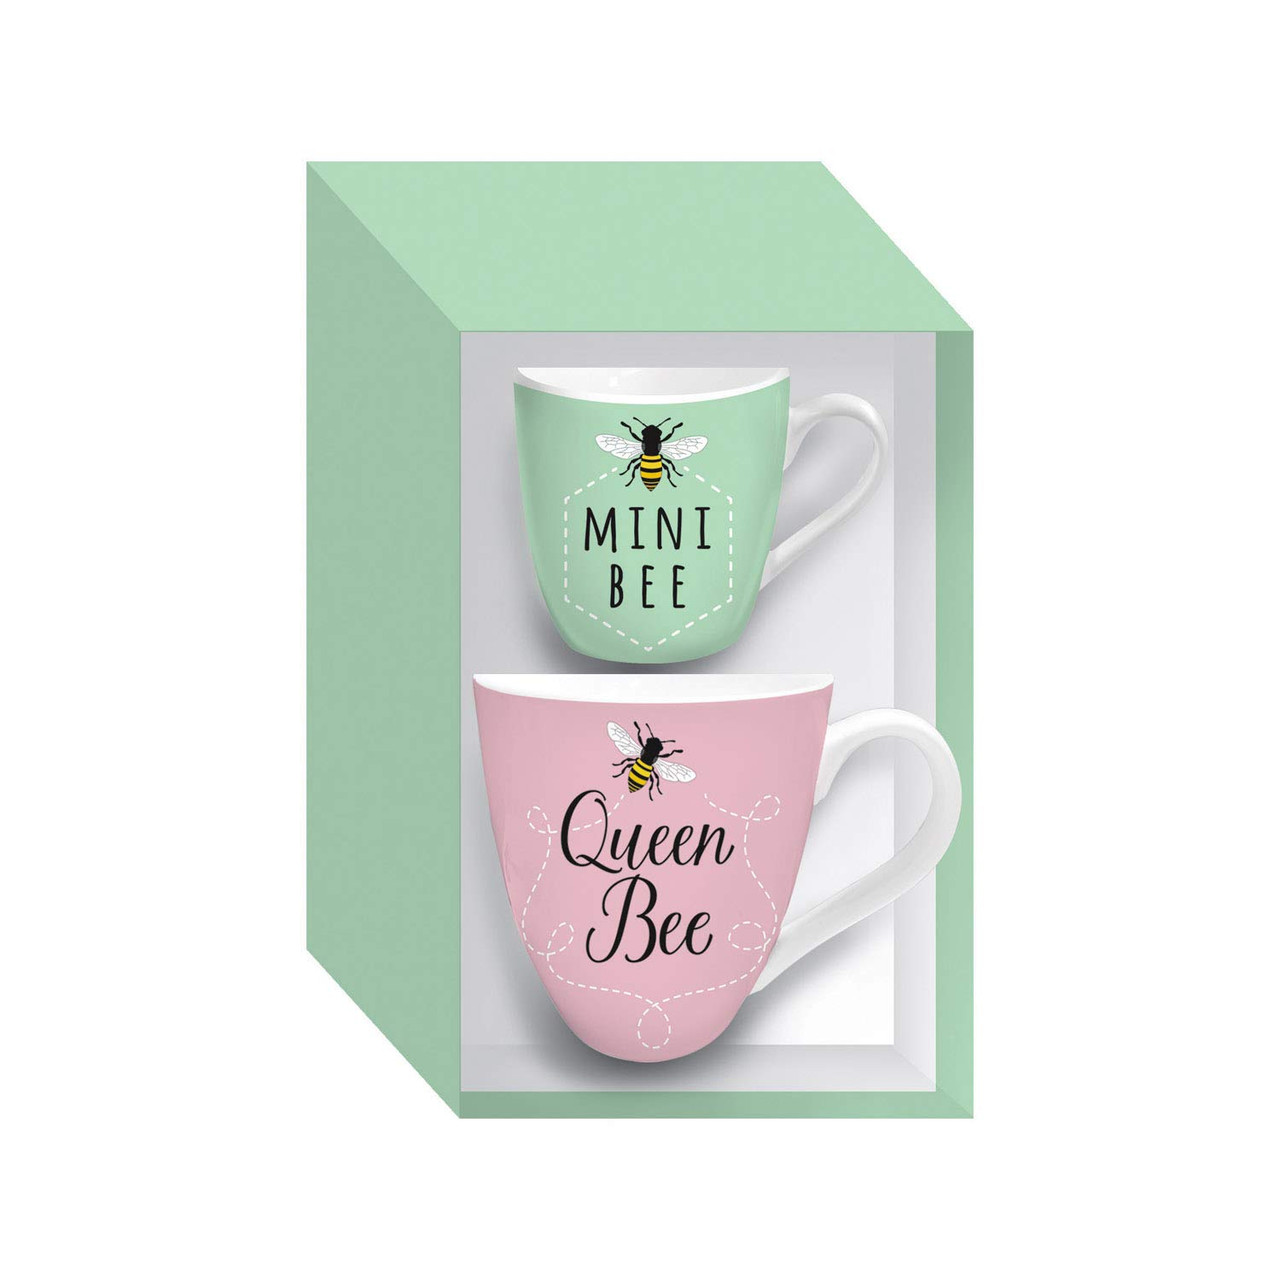 4 x 4 x 6 Inches Queen Bee & Mini Bee Mommy & Me Ceramic Cup Set 